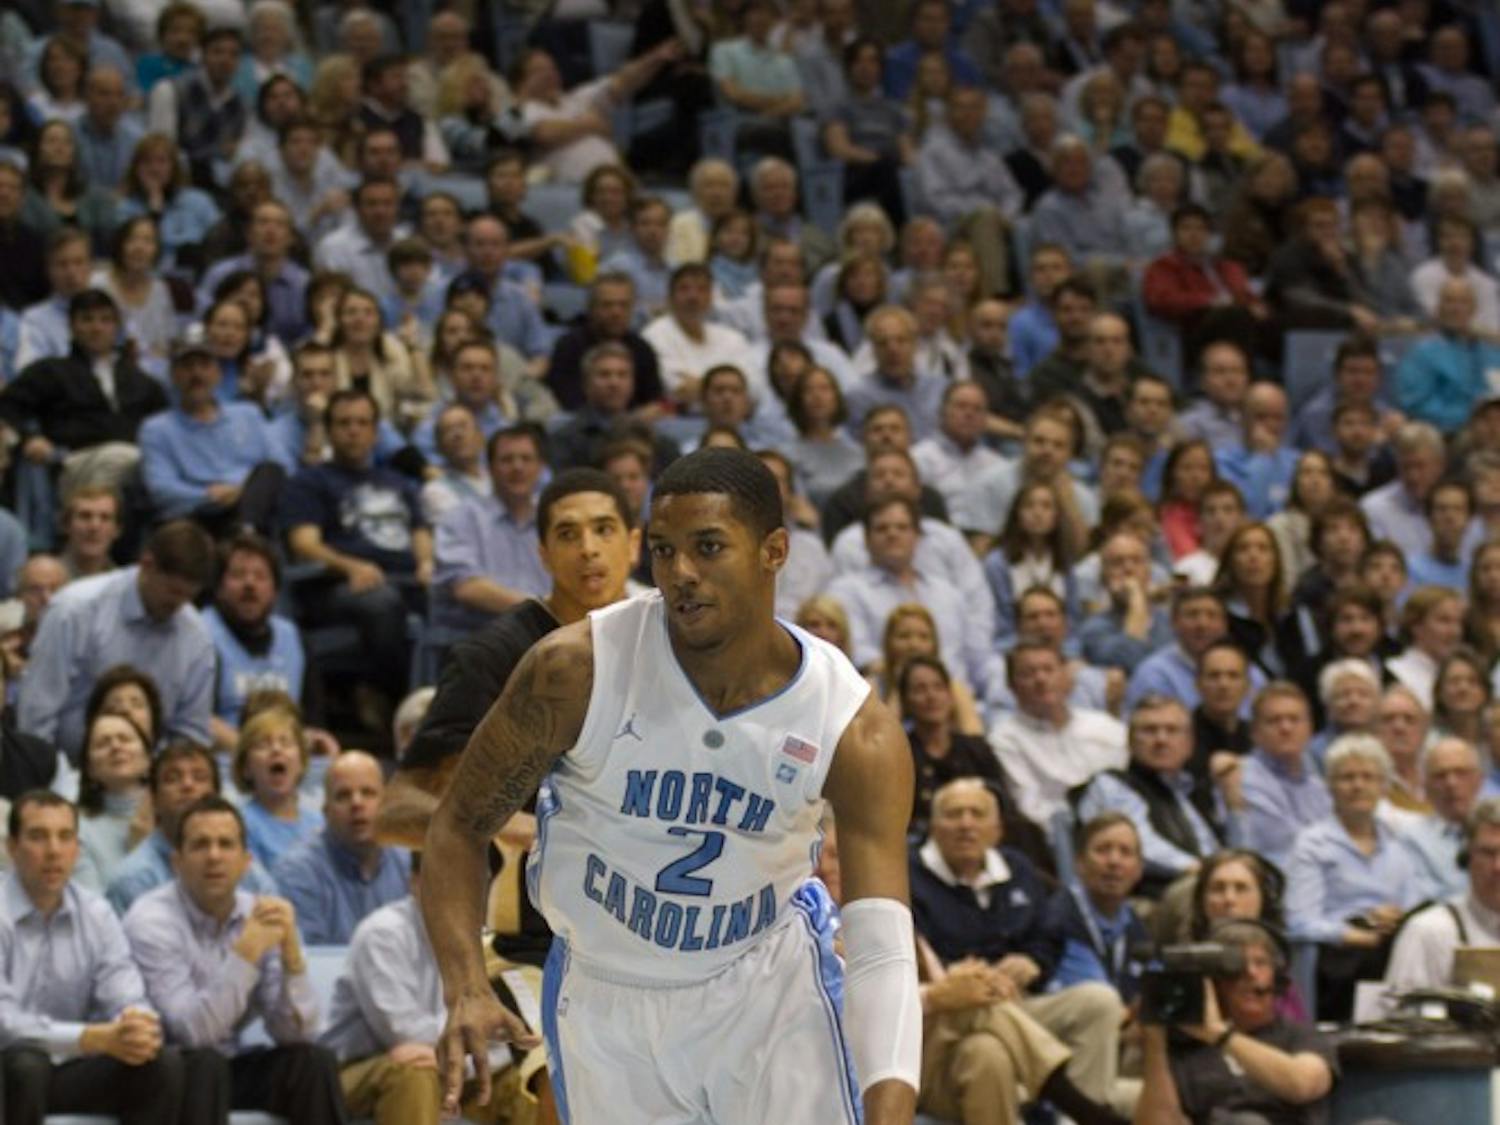 	The University of North Carolina Tar Heels played the Wake Forest Demon Deacons on Tuesday, February 15, 2011 in The Dean E. Smith Center. The Tar Heels won 78-64.